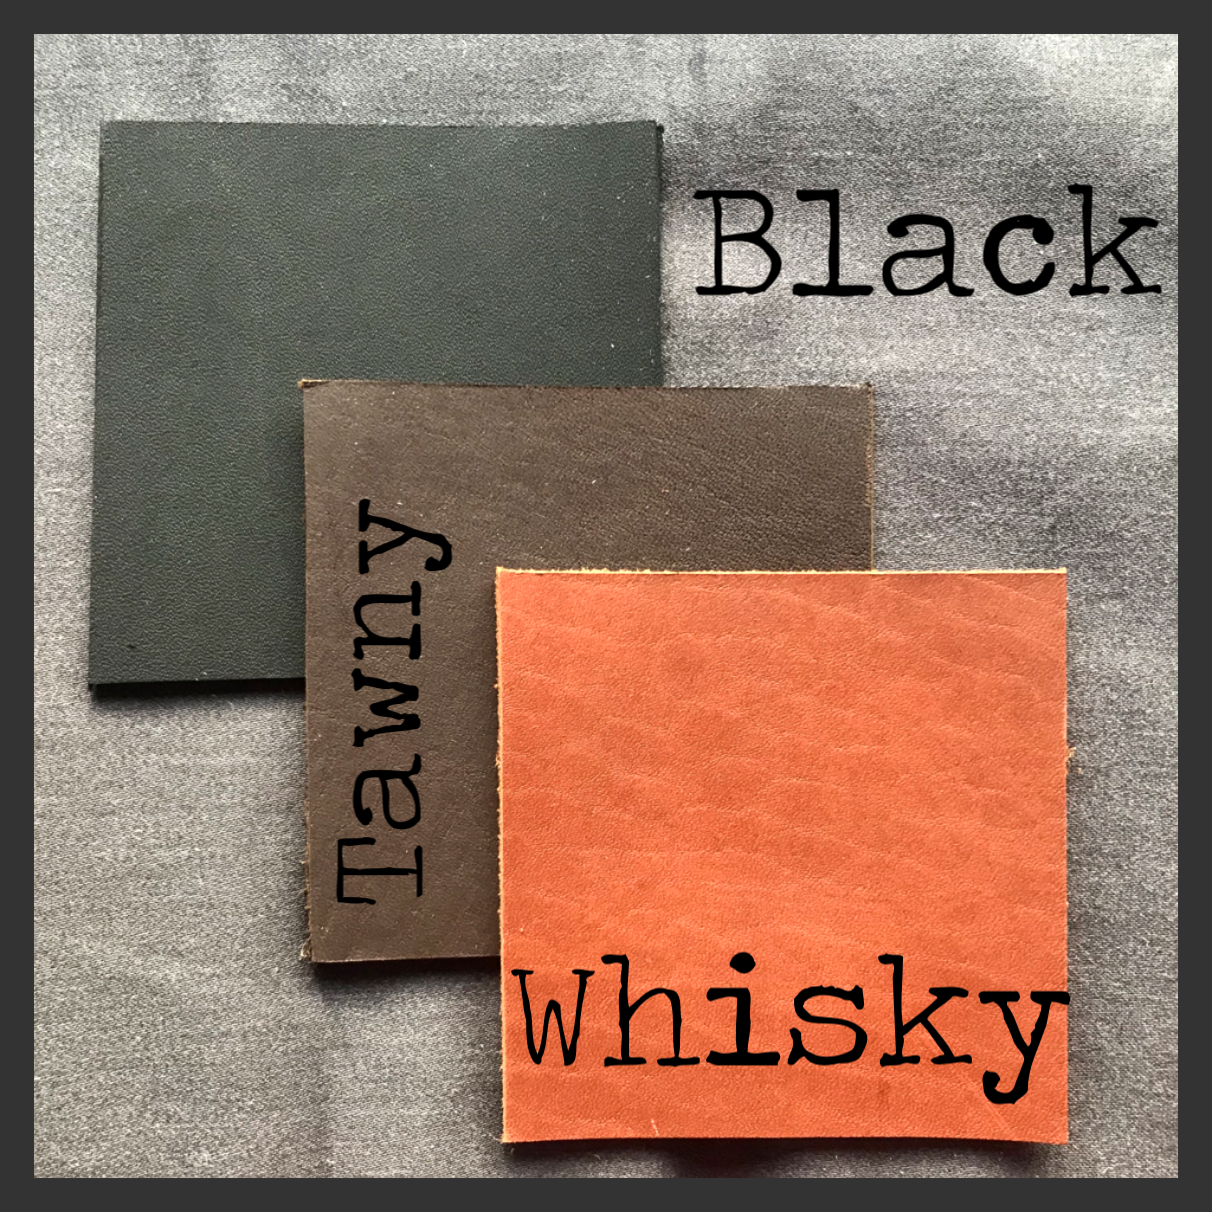 Leather samples in black, tawny and Whisky for selection of your custom Chopper Bag colours.